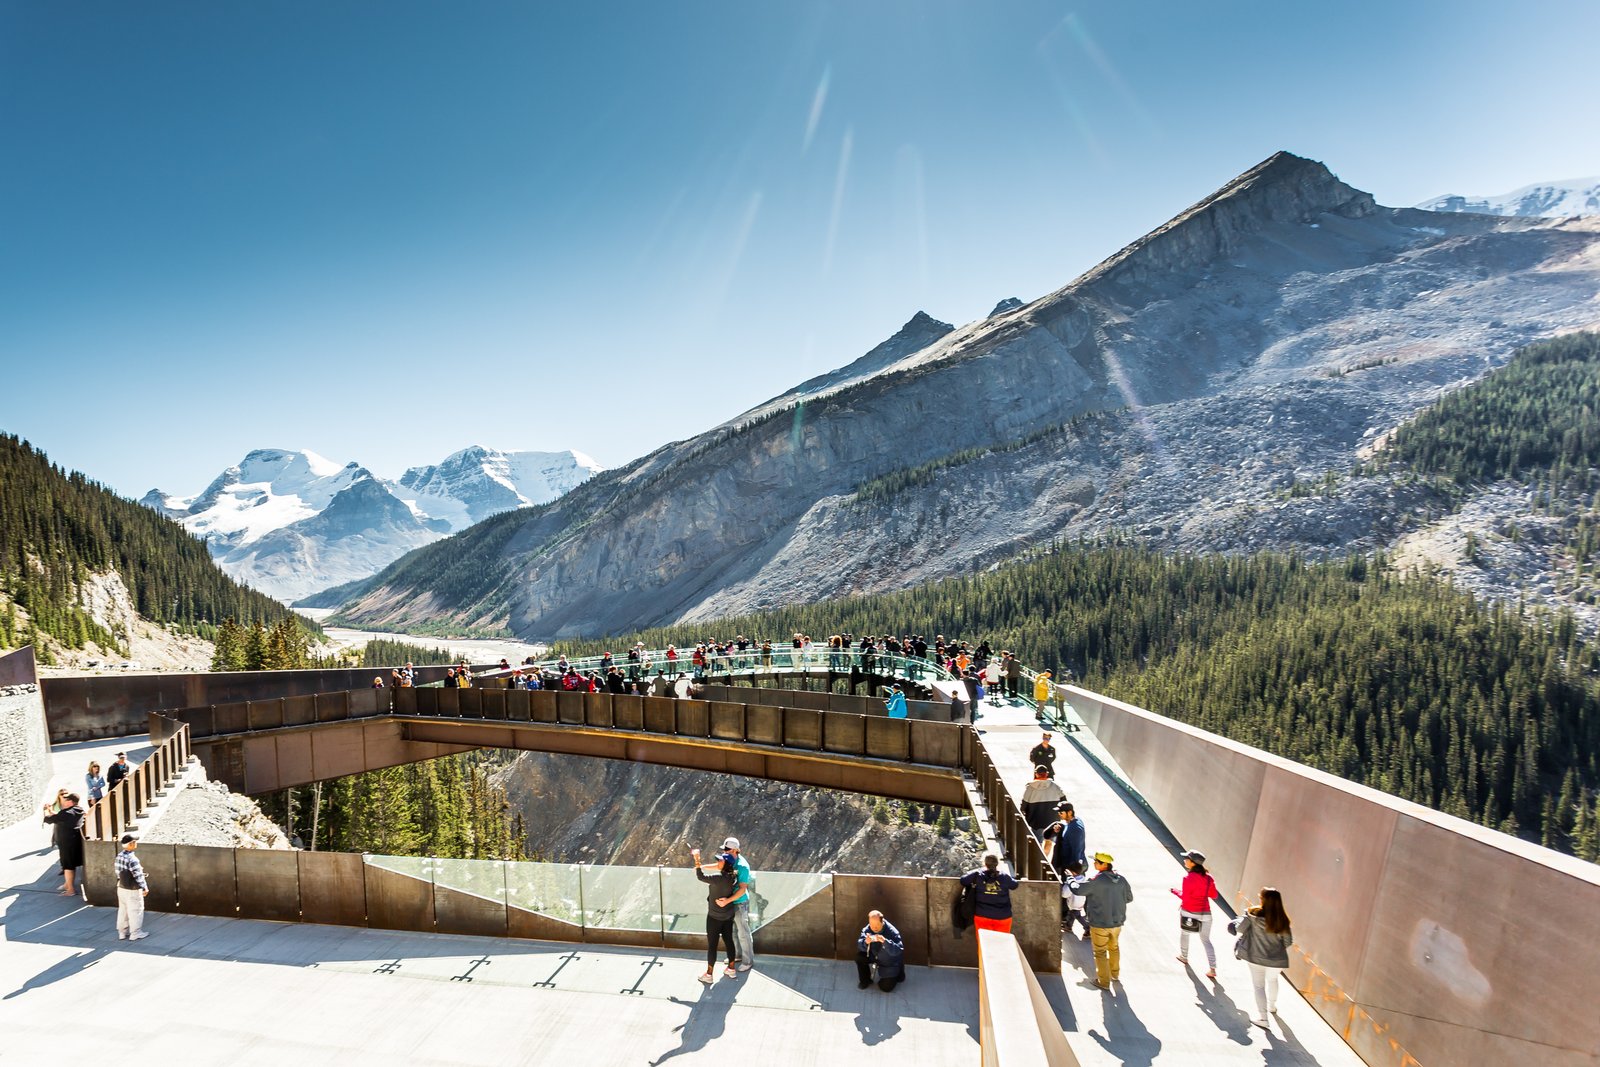 People walking along the Glacier Skywalk Experience at the Columbia Ice field on the Ice fields Parkway